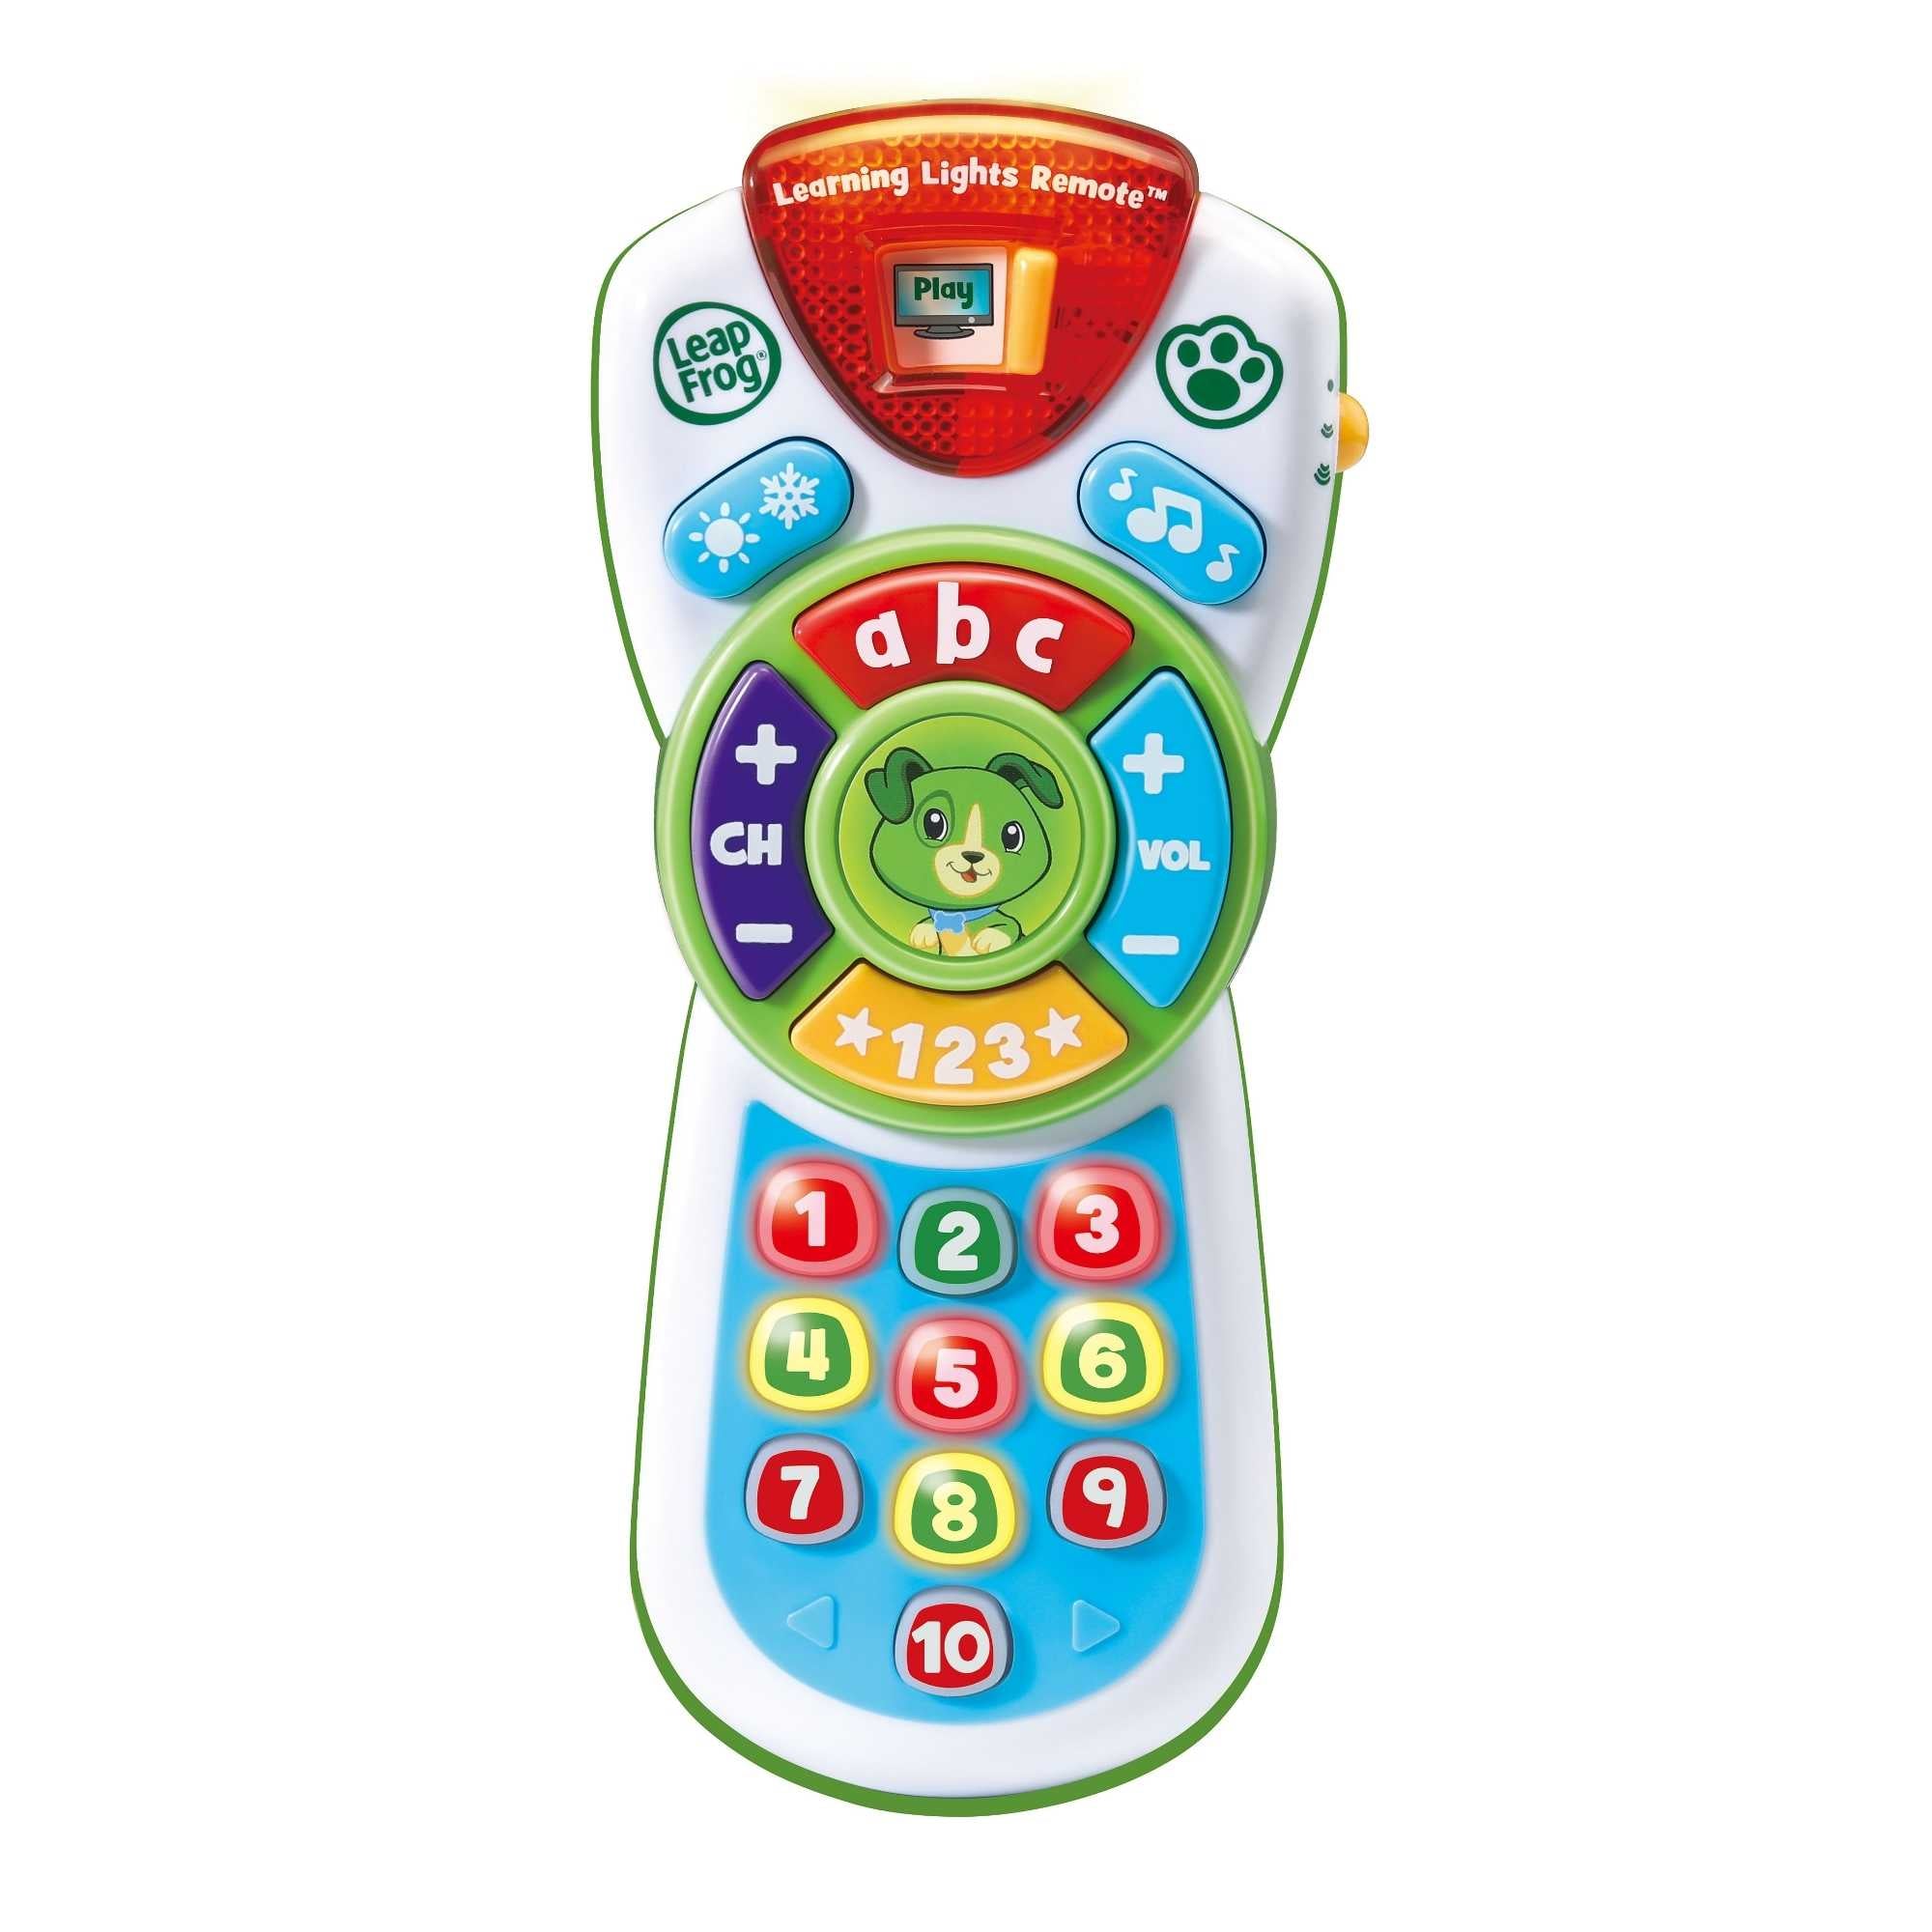 LeapFrog Scouts Learning Lights Remote Toy